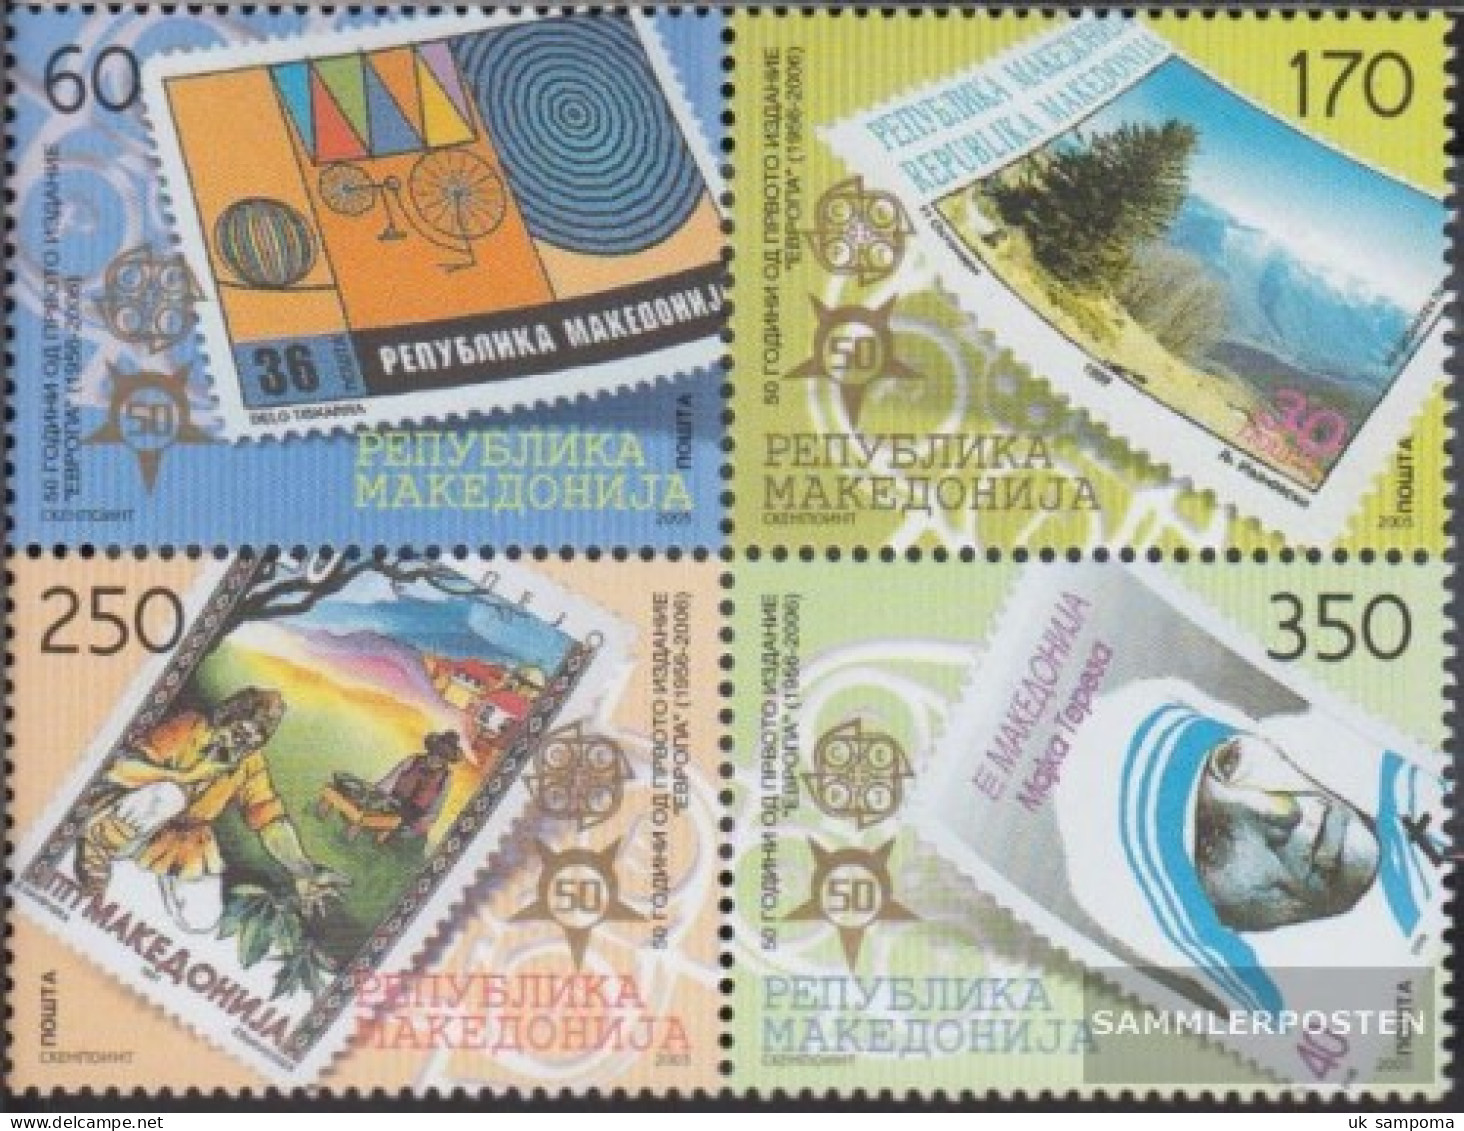 Makedonien 370-373 Block Of Four (complete Issue) Unmounted Mint / Never Hinged 2005 50 Years Europe Trade - North Macedonia